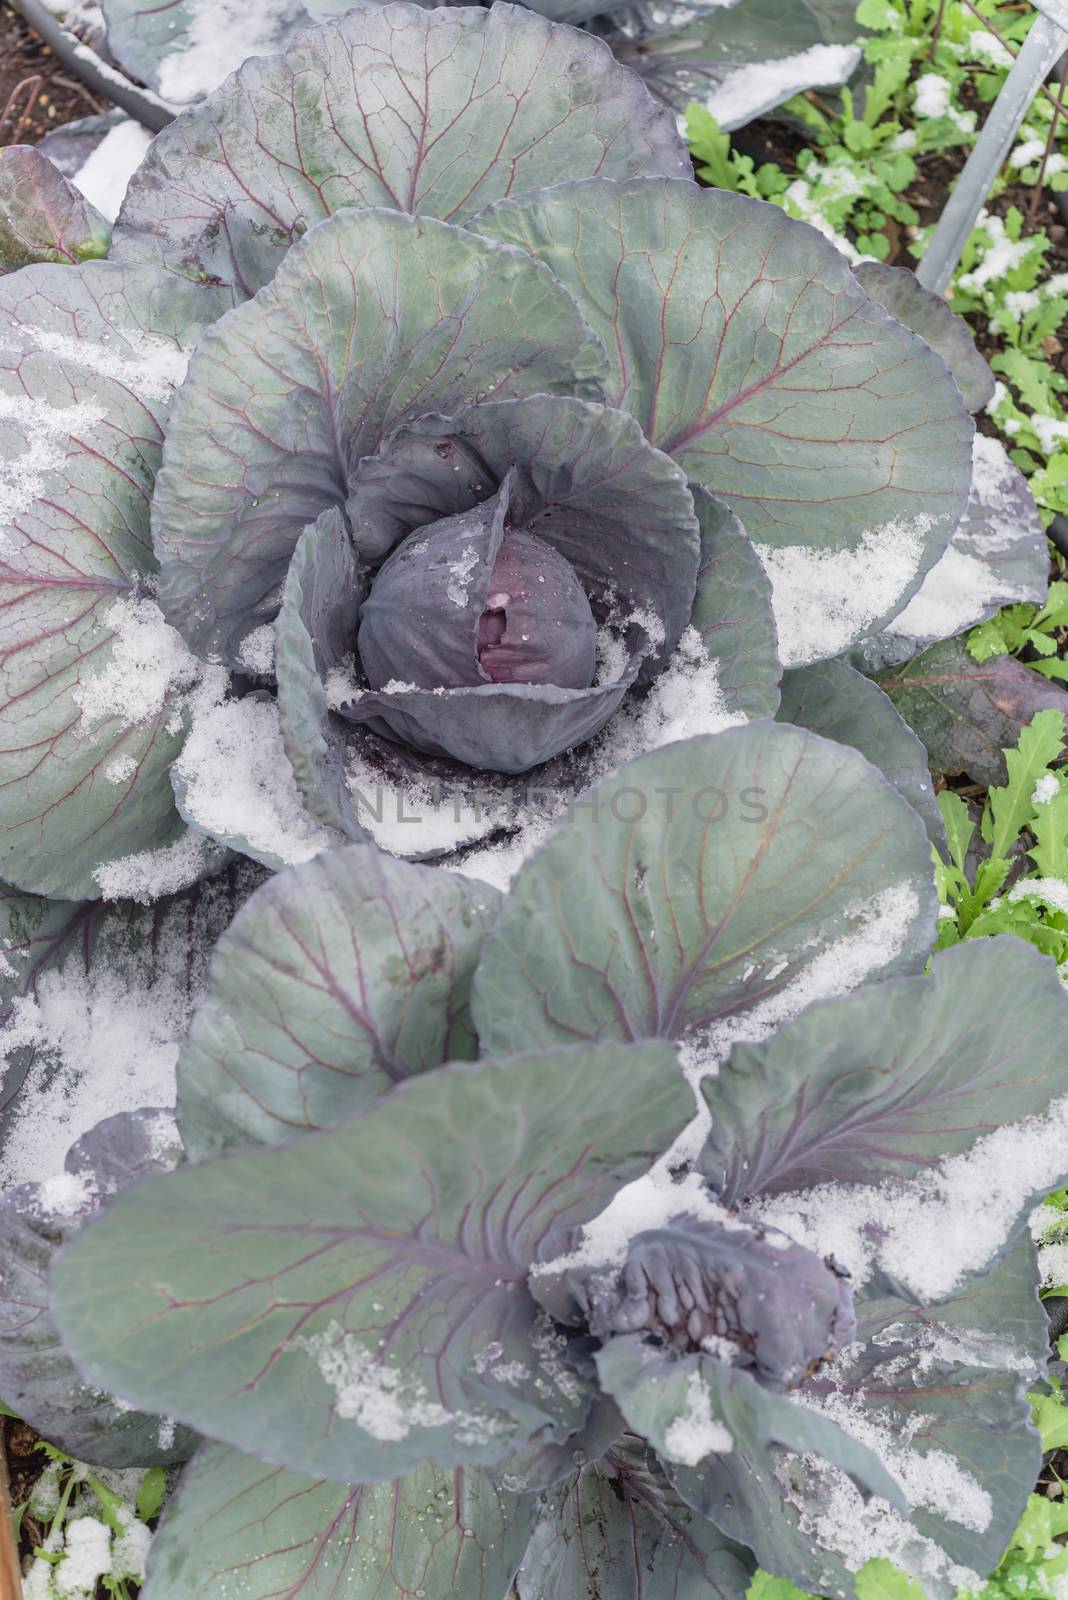 Multiple red cabbage heads in snow covered at organic garden near Dallas, Texas, USA by trongnguyen